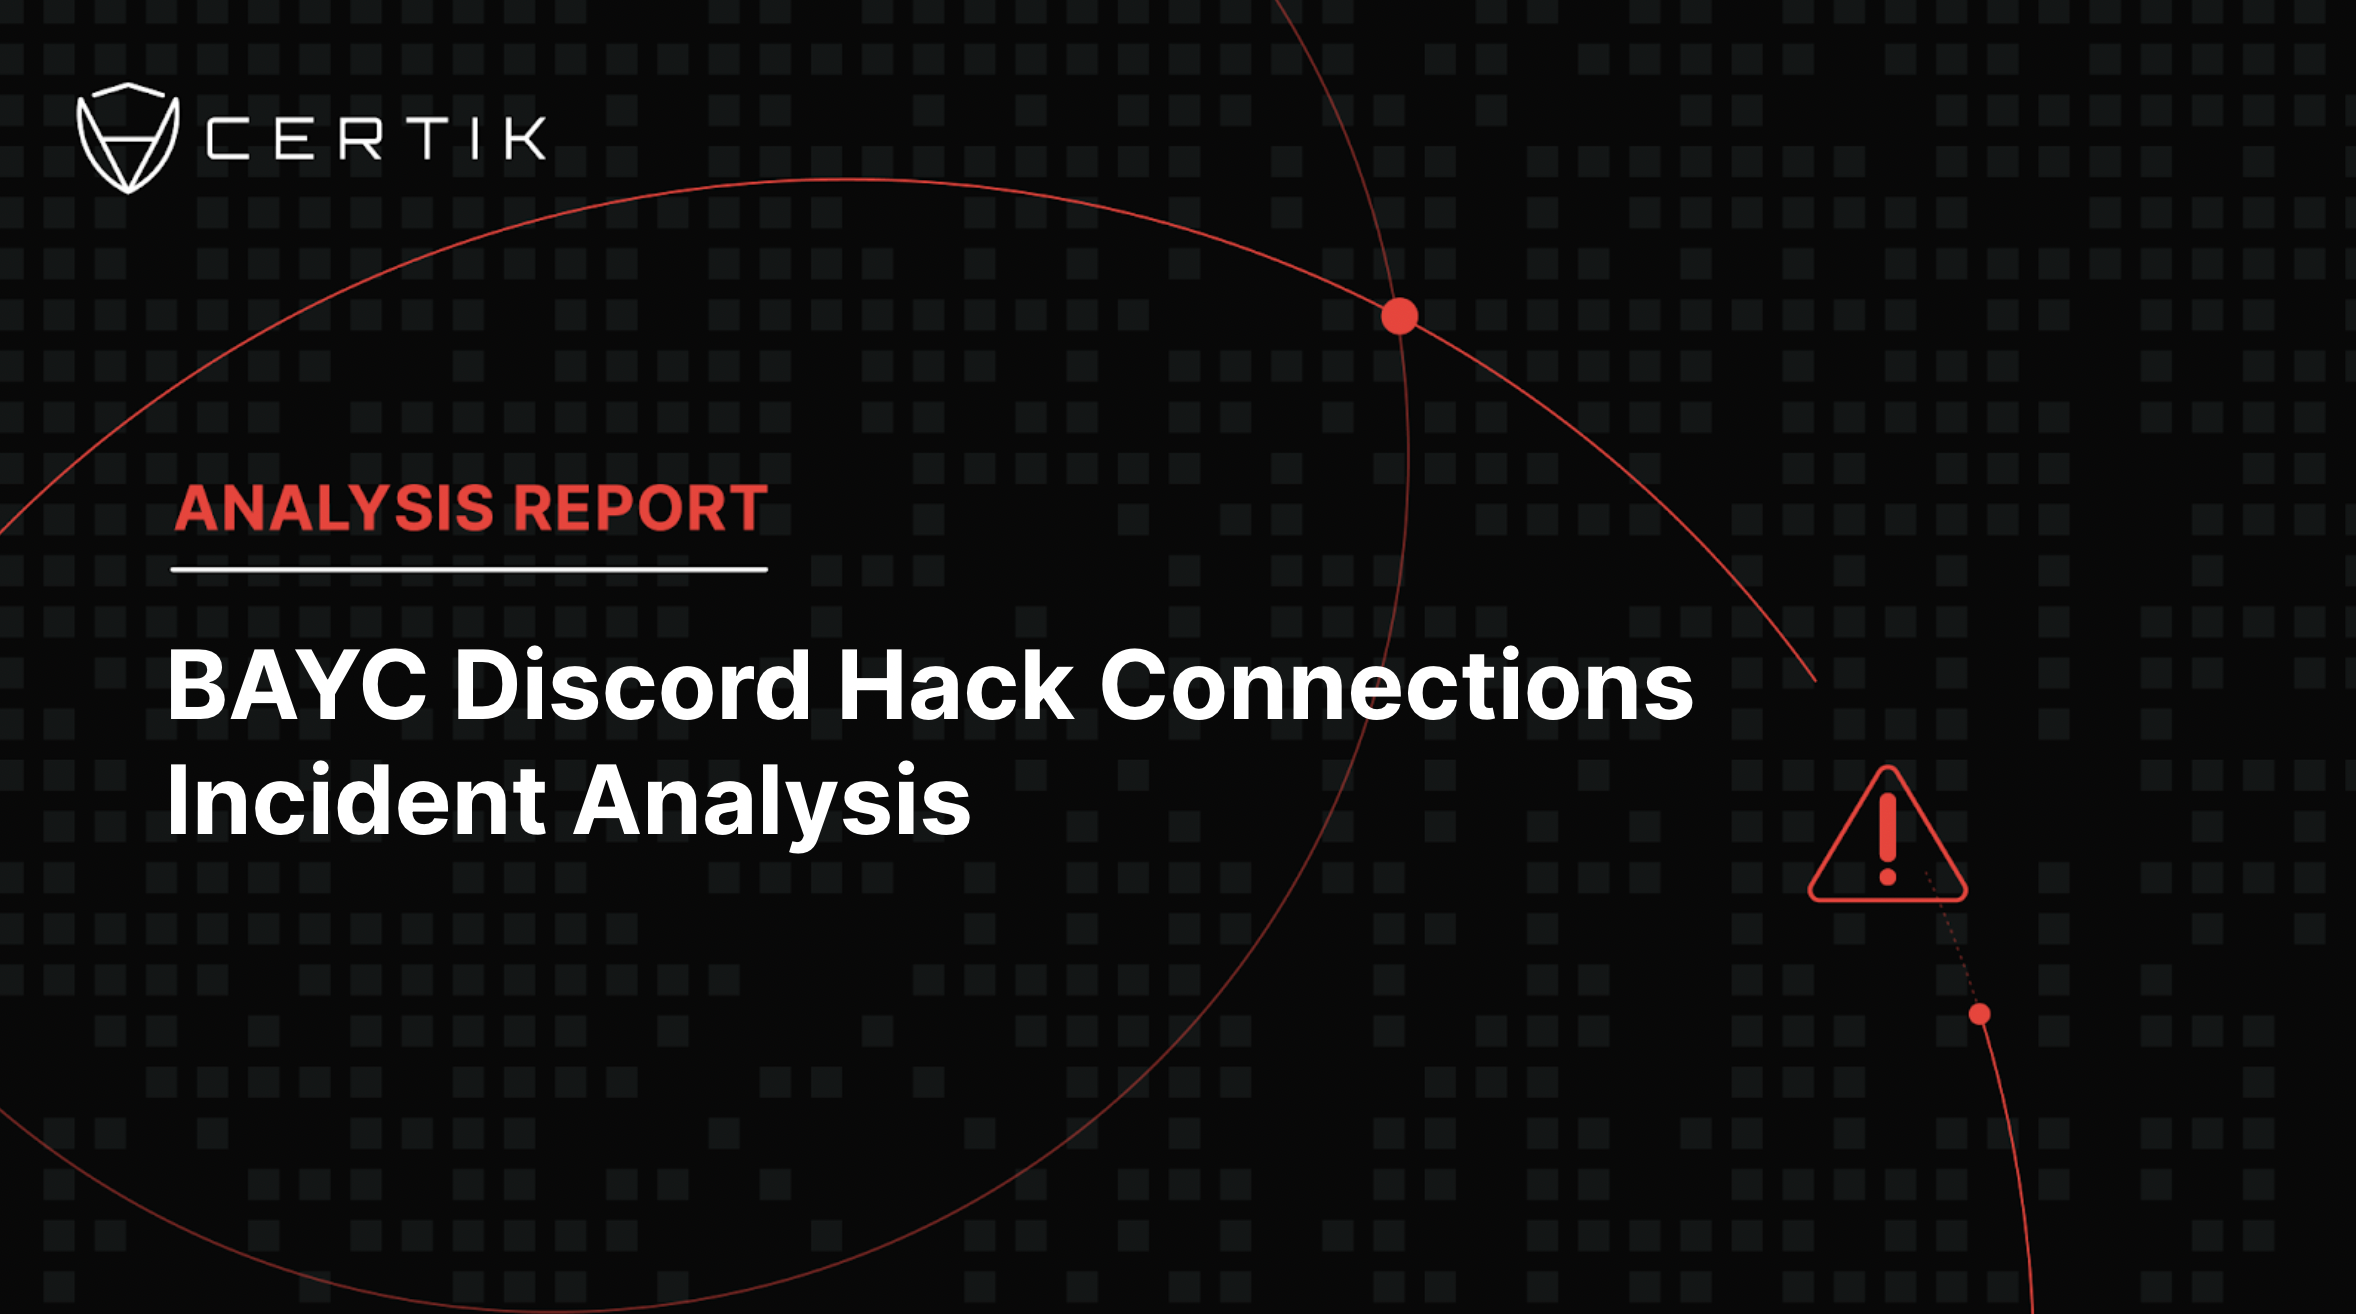 BAYC Discord Hack Connections